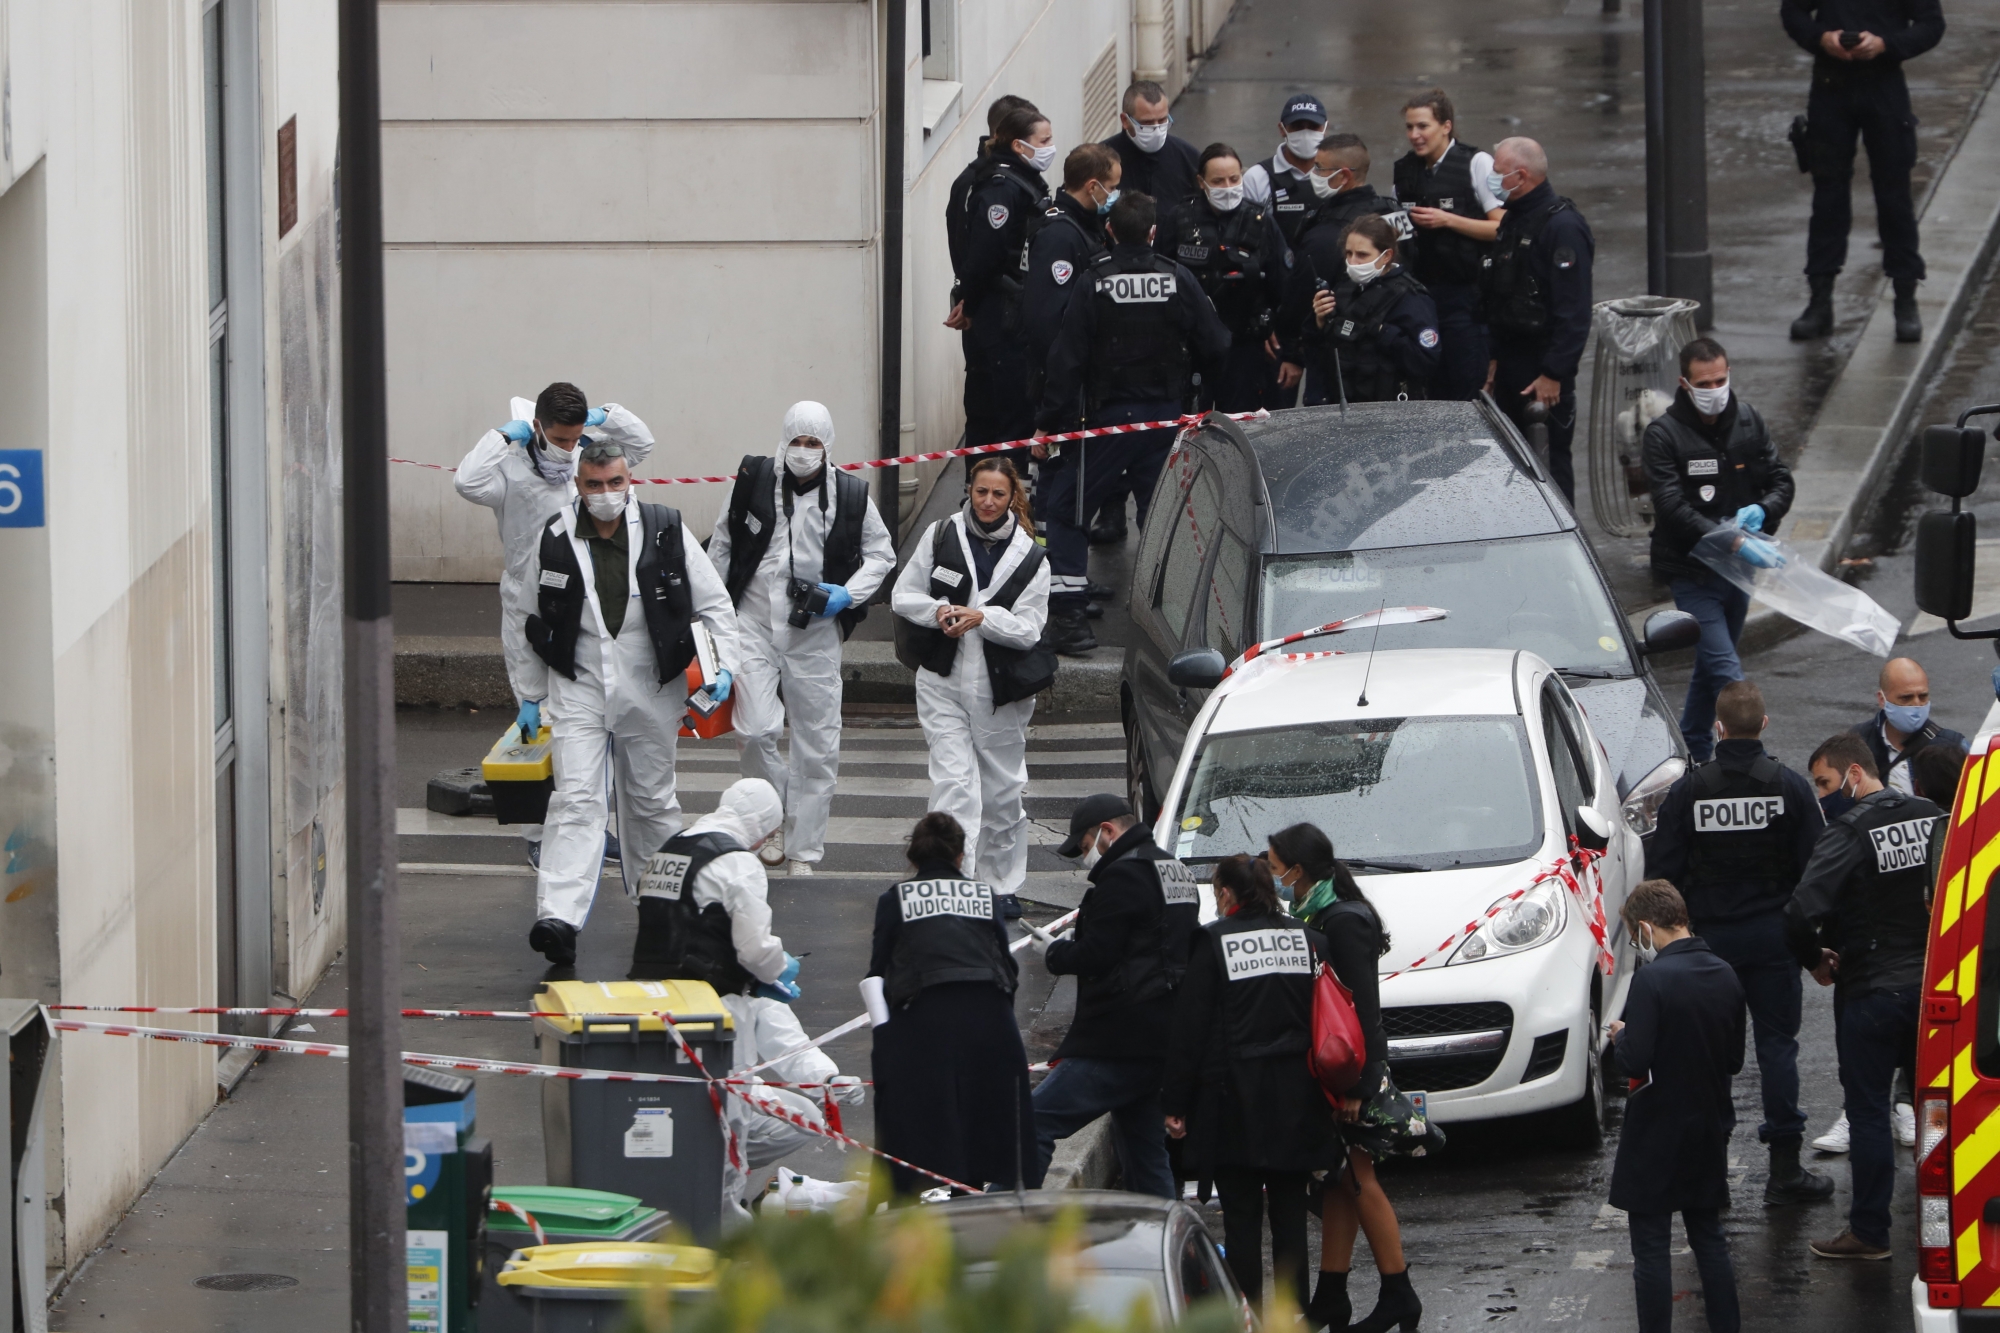 Police officers gather in the area of a knife attack near the former offices of satirical newspaper Charlie Hebdo, Friday Sept. 25, 2020 in Paris. Paris police say they have arrested a man suspected of a knife attack that wounded at least two people near the former offices of satirical newspaper Charlie Hebdo. Police initially thought there were two attackers but now say there was only one. (AP Photo/Thibault Camus) ArcInfo